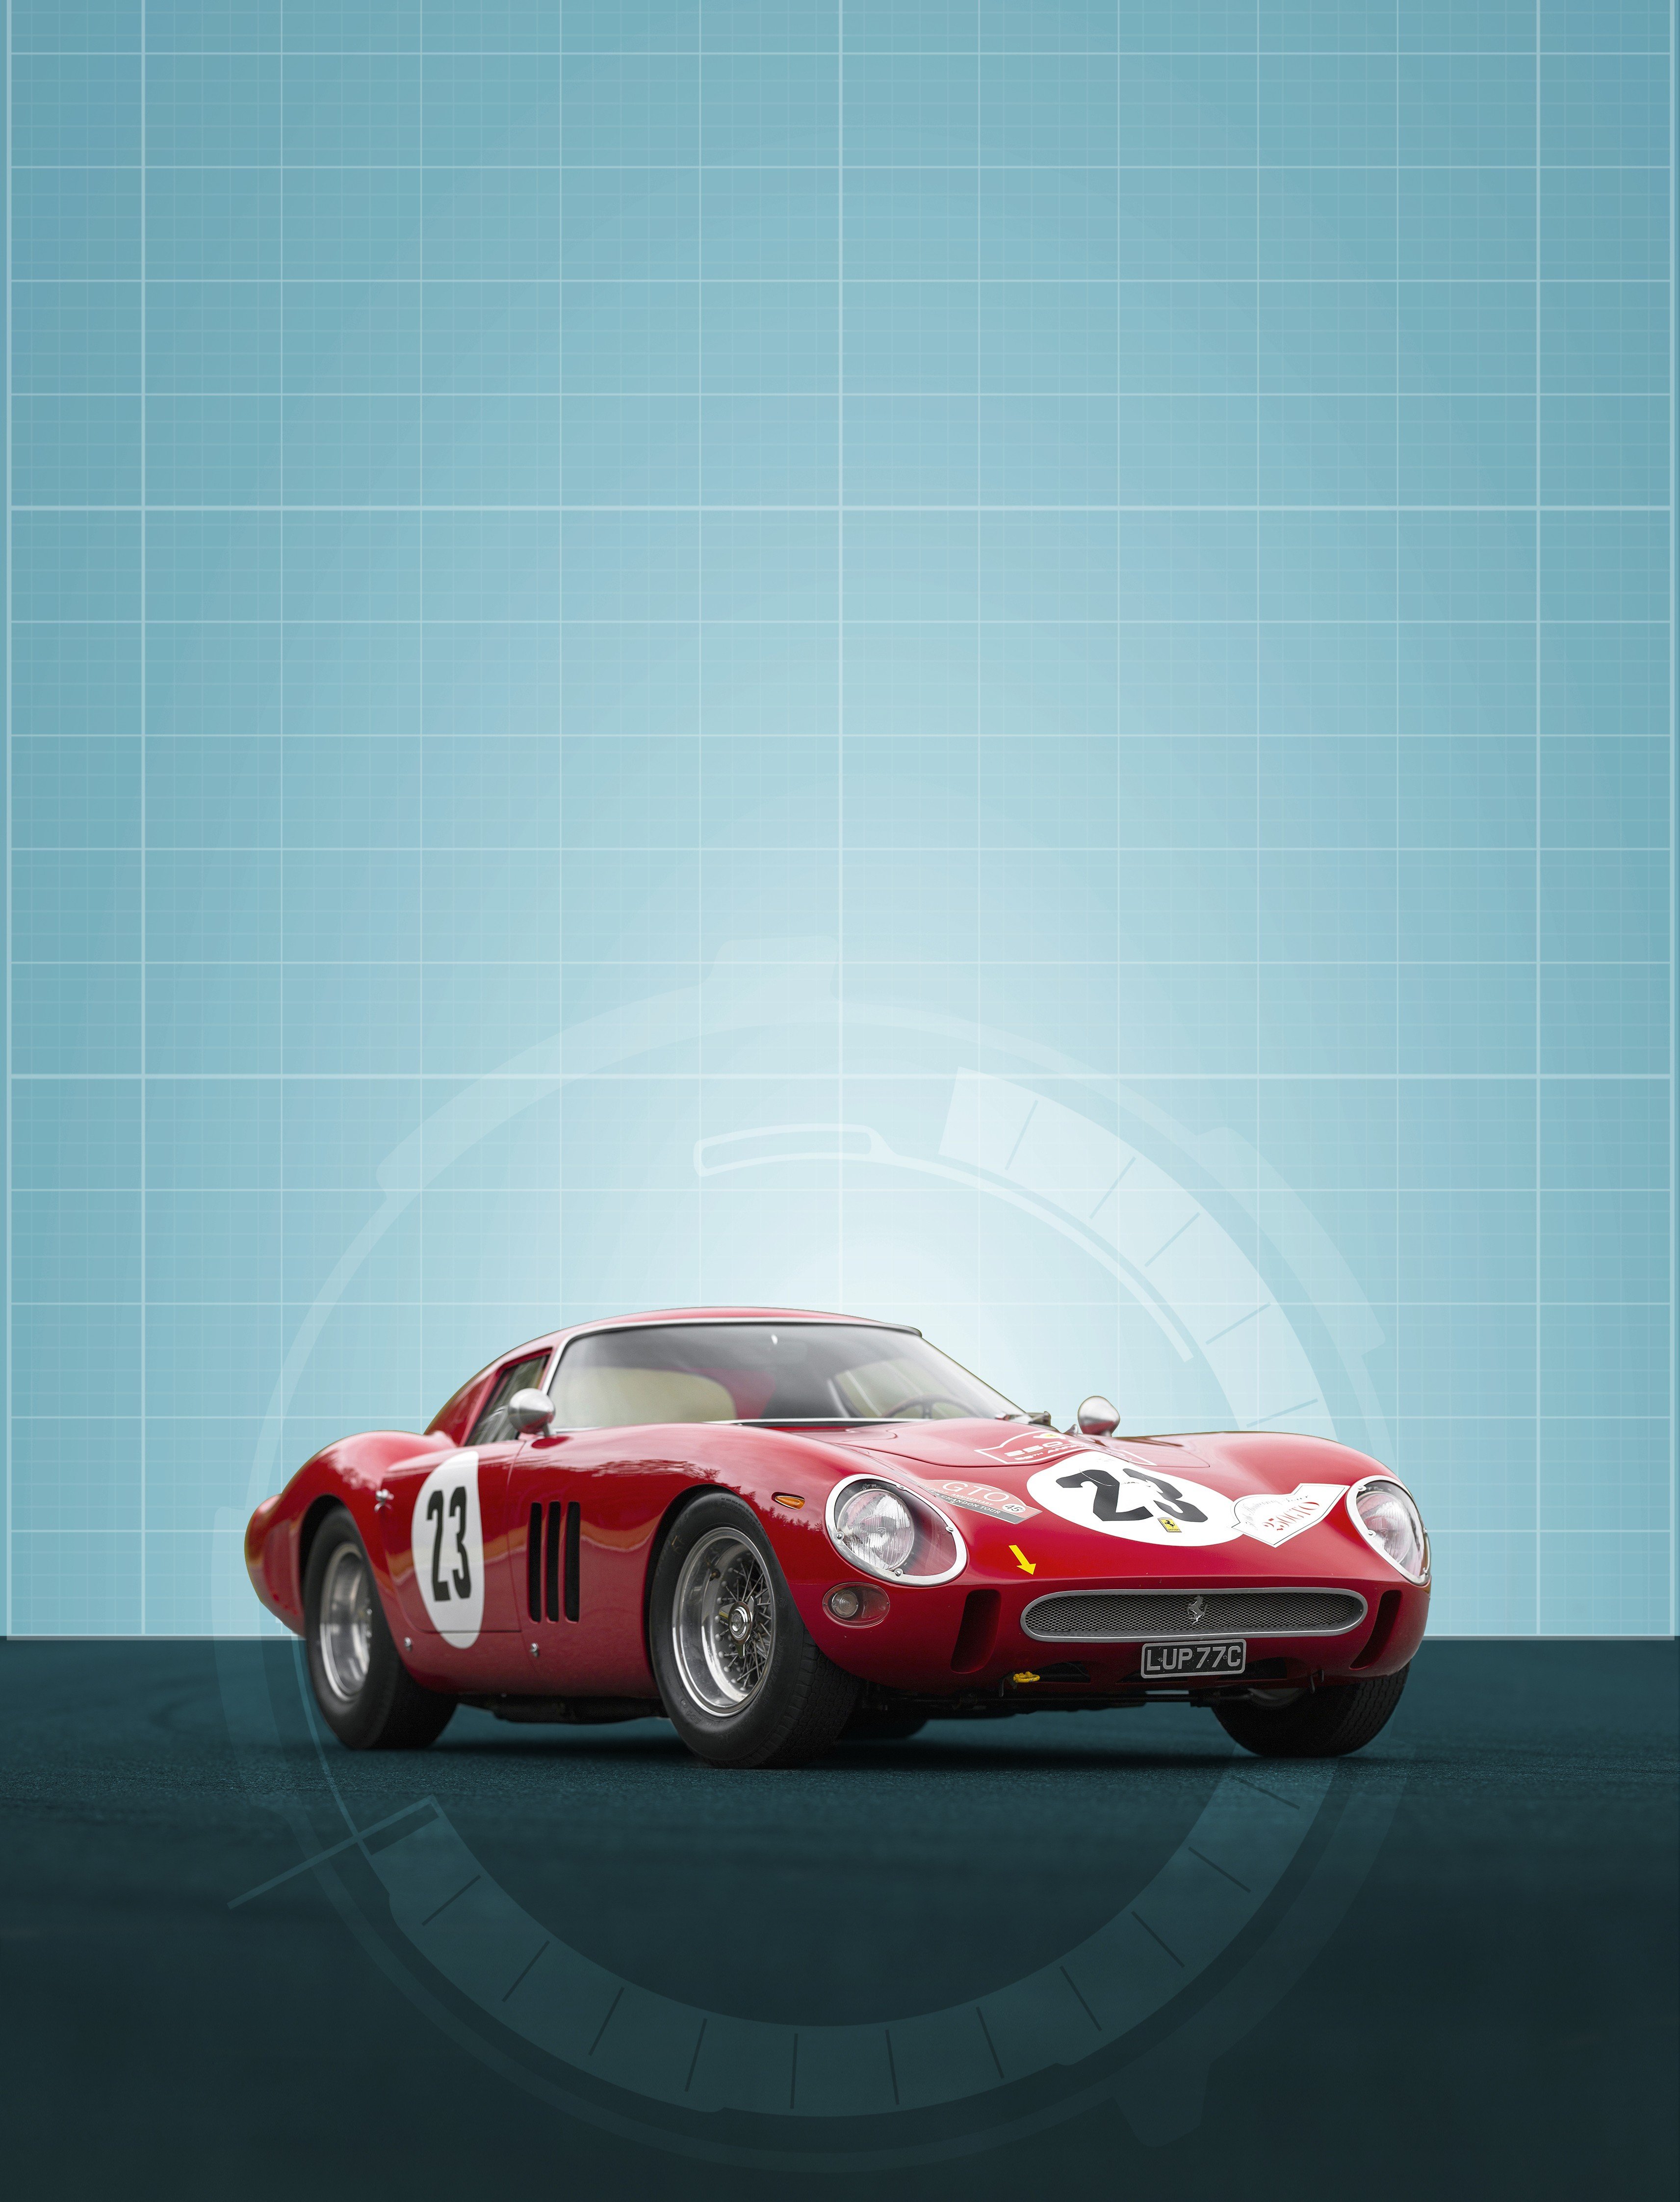 Why the 1962 Ferrari 250 GTO is an 'investment of passion' that is 